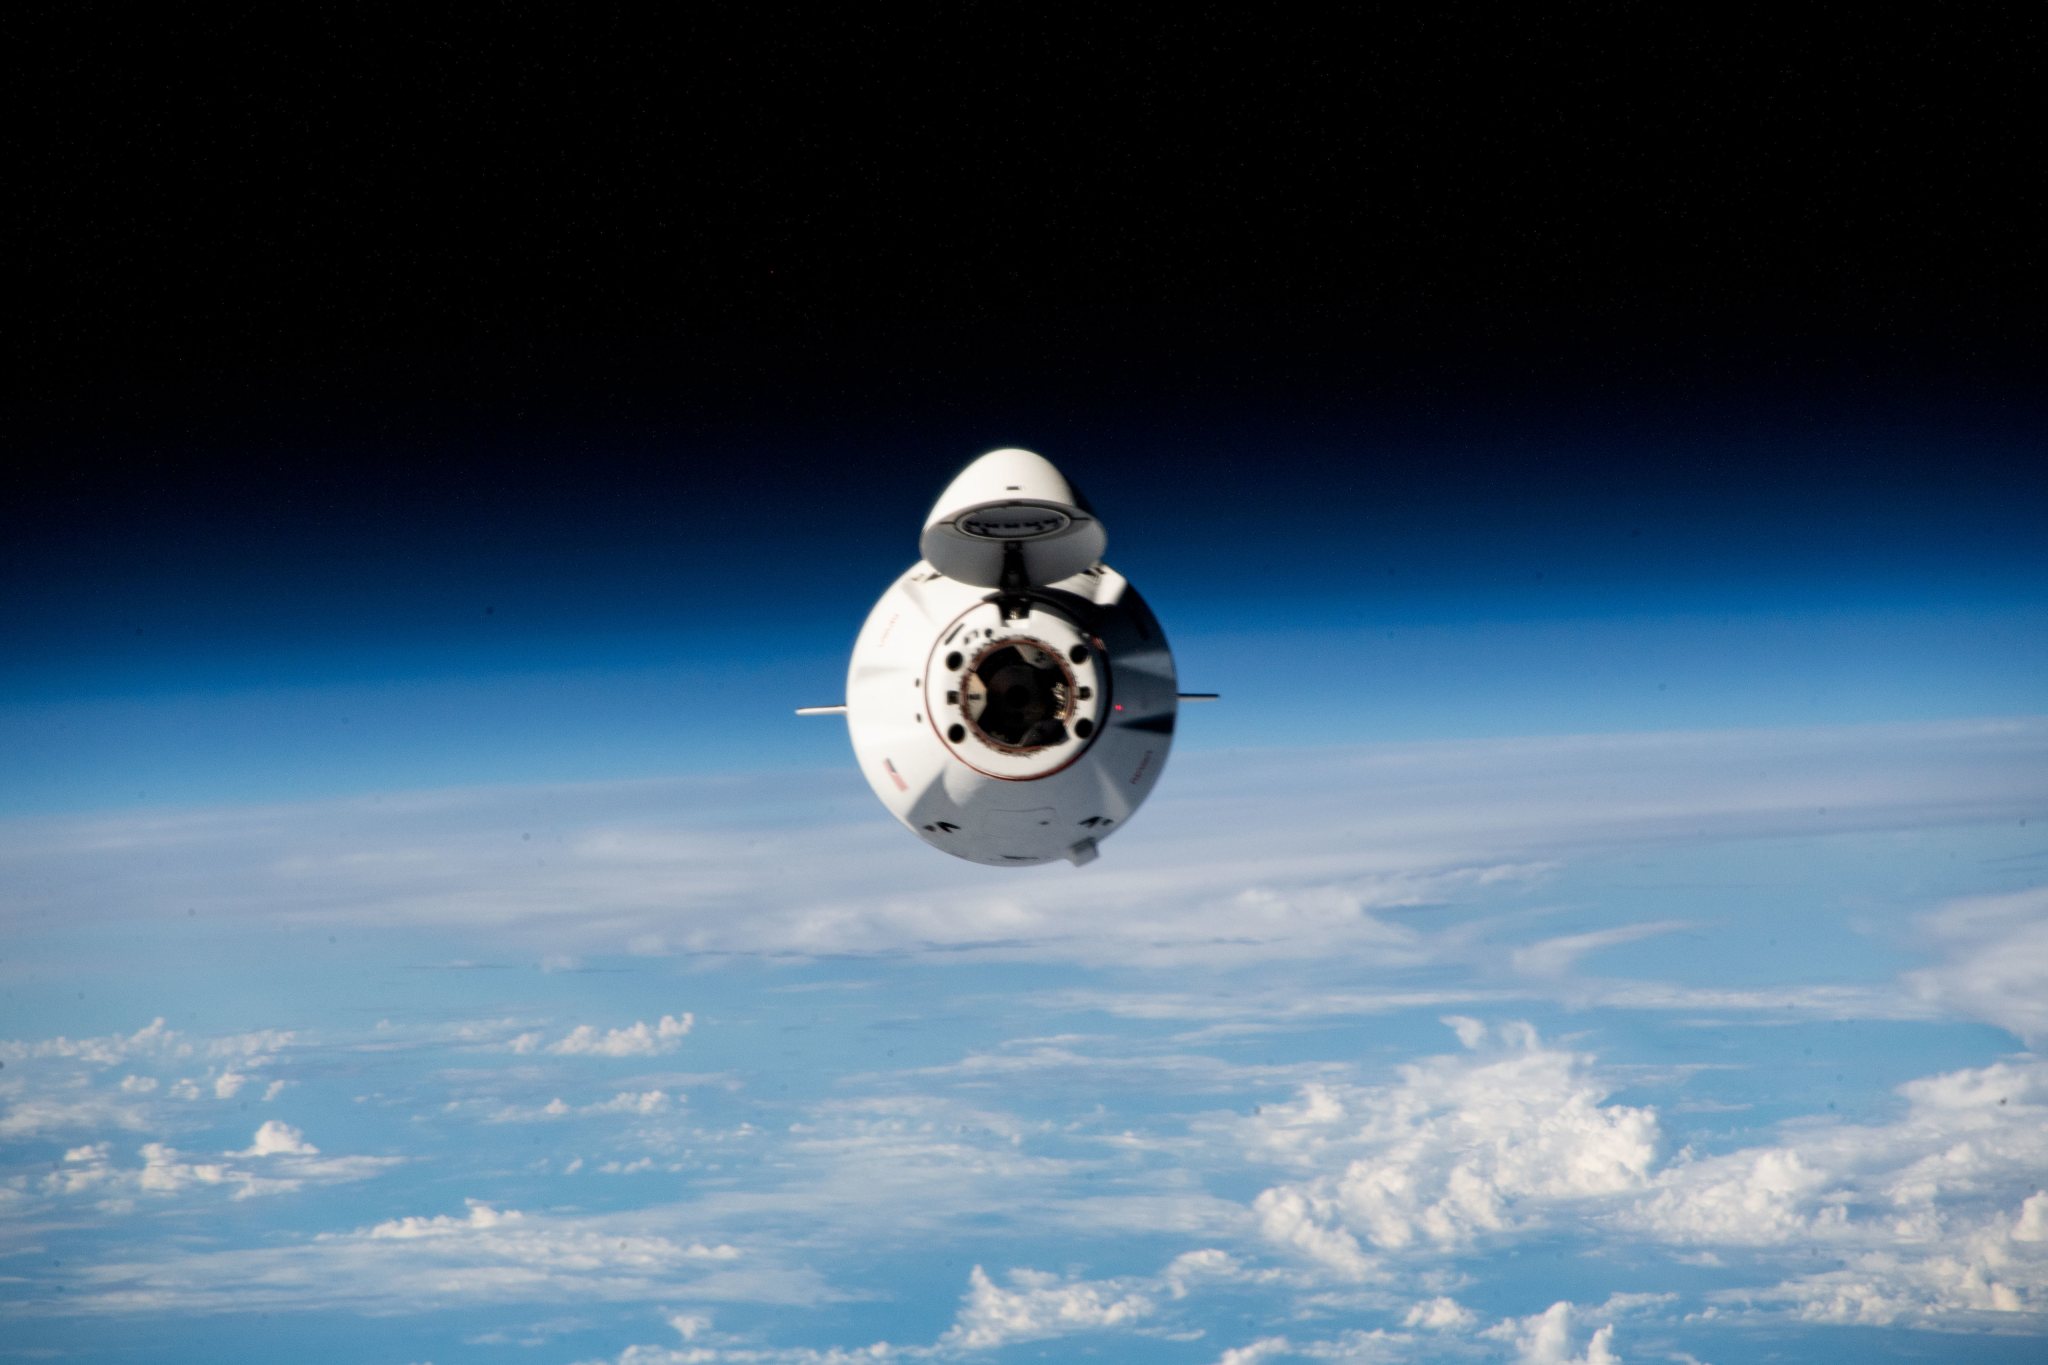 The SpaceX Dragon resupply ship approaches the International Space Station carrying more than 6,200 pounds of science experiments, crew supplies, and other cargo, to replenish the Expedition 68 crew. Both spacecraft were flying 269 miles above the Indian Ocean near Madagascar at the time of this photograph.